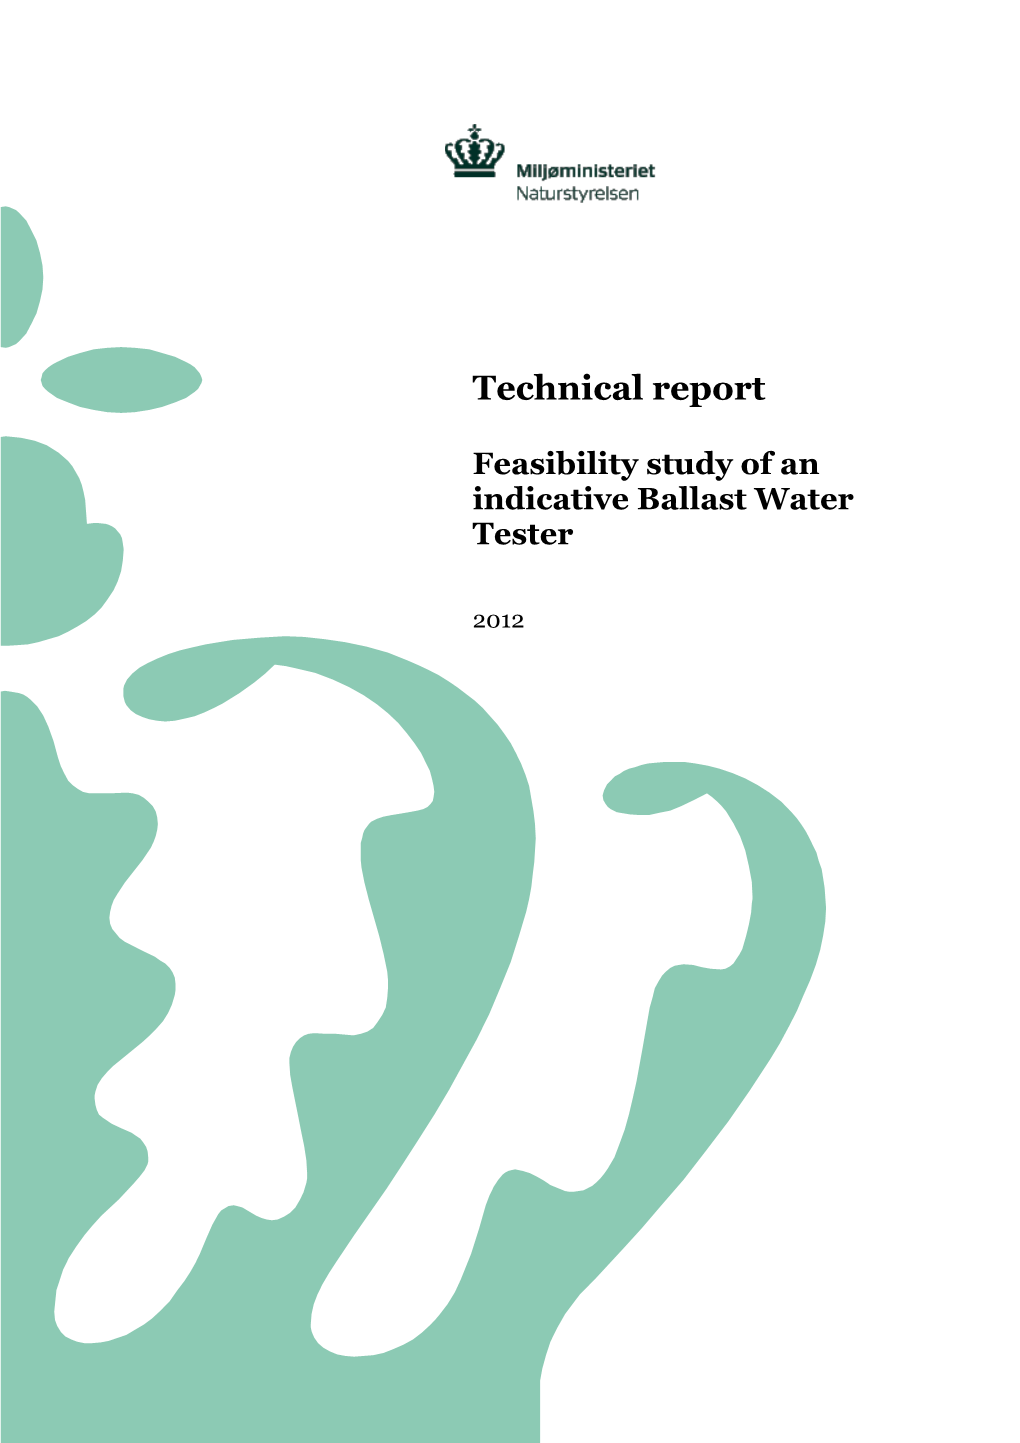 Technical Report Feasibility Study of an Indicative Ballast Water Tester